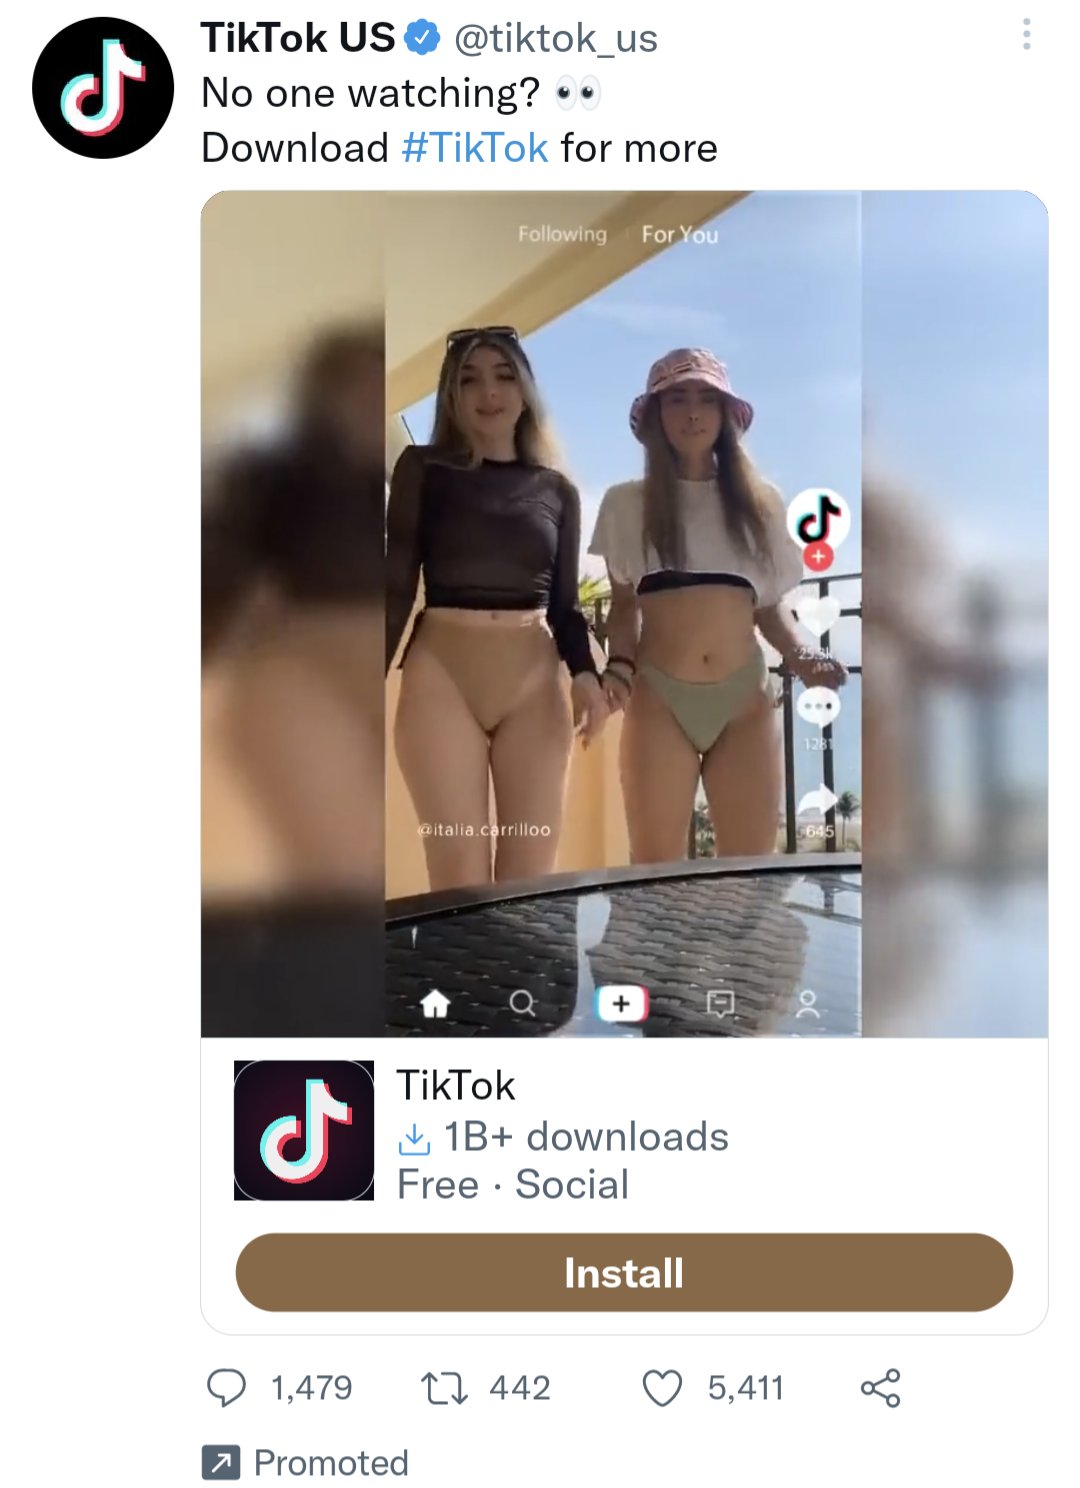 typewriter sinking into the sea on X: Why is TikTok sexy girls available  in your digital towning me?  / X